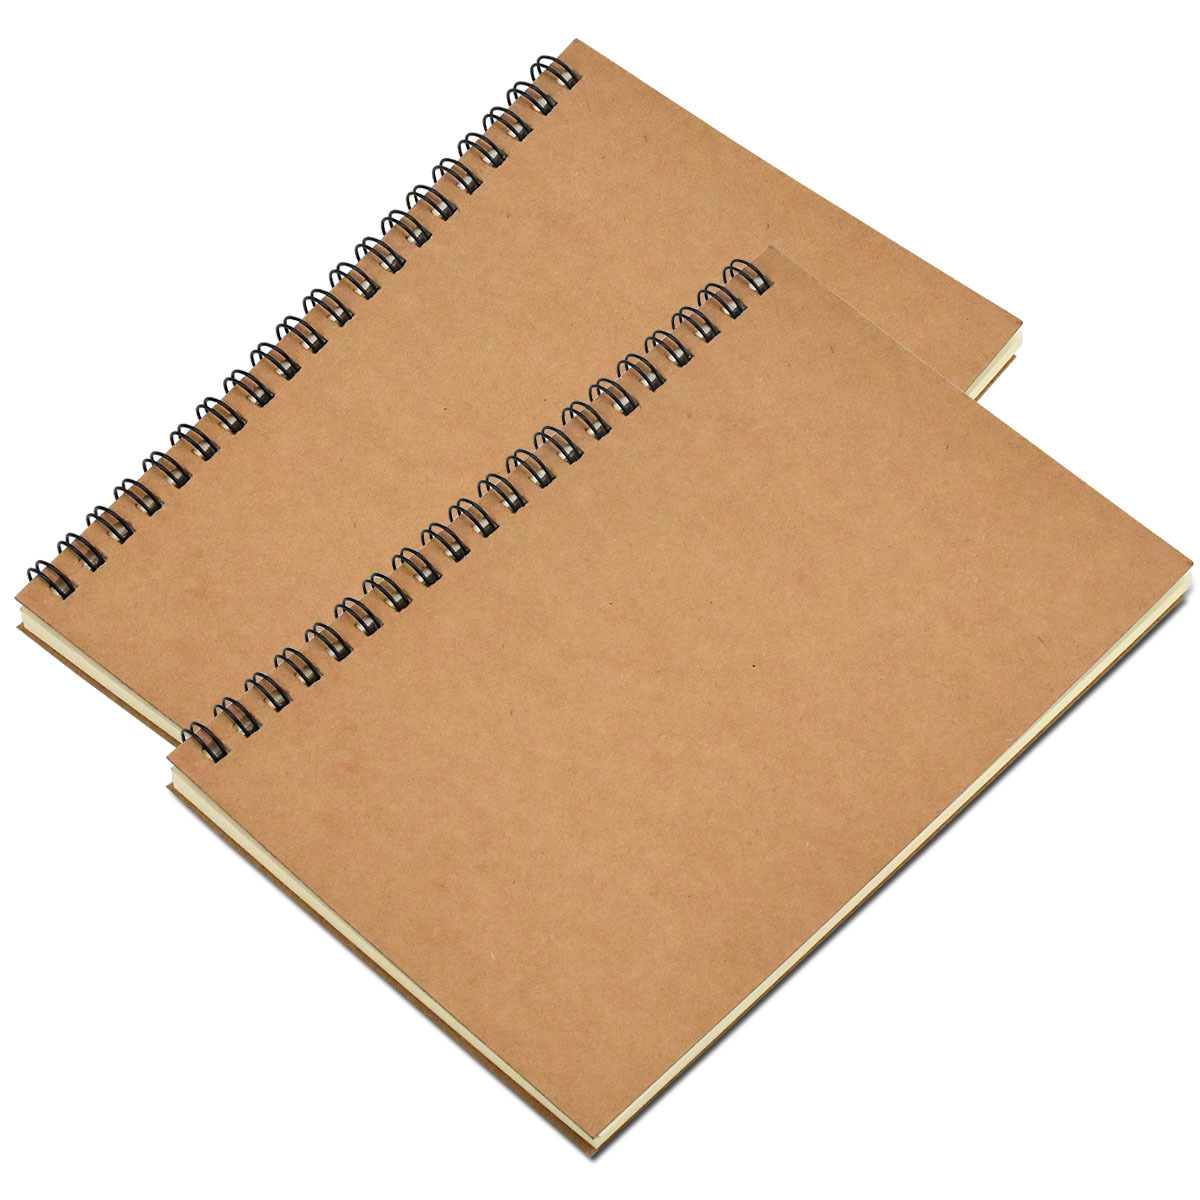 ODM OEM Customized Black Kraft Paper Bound 180GSM Thick Paper Sketchbook  Notepad A5 Blank Plain Pages